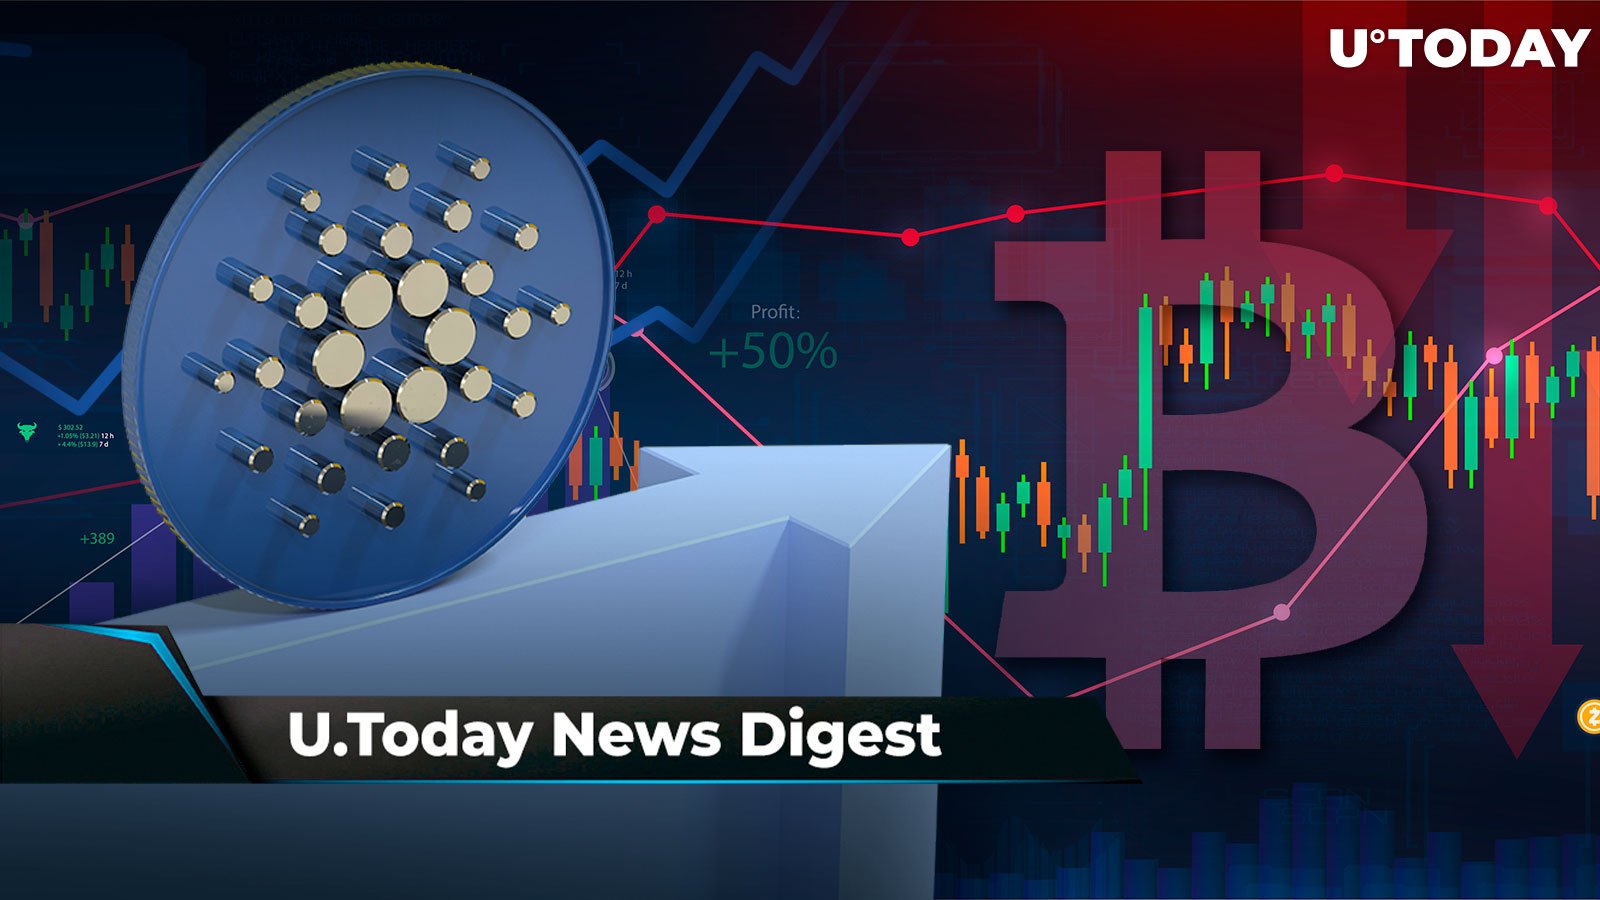 BTC Might Drop to $19,000 Again, ETH Fees Plunge Ahead of Merge Event, Cardano Reaches New Milestone: Crypto News Digest by U.Today